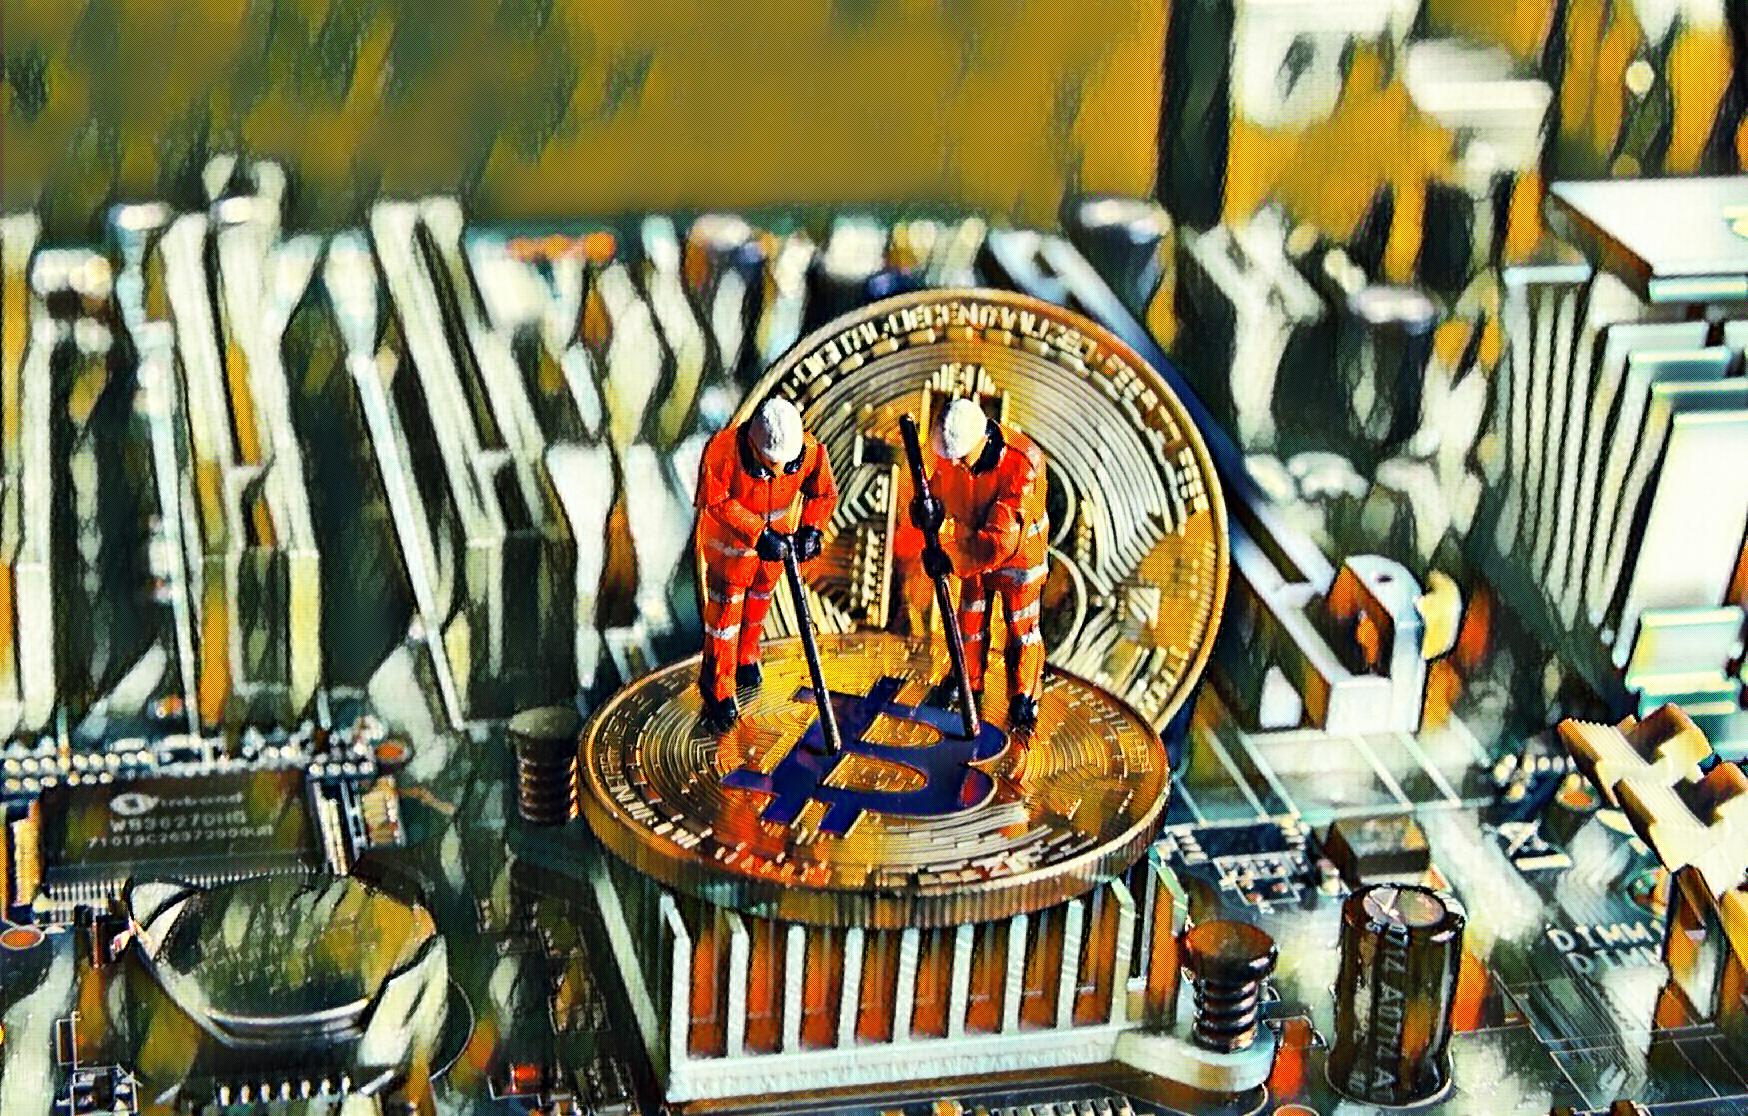 Exchange Traded Bitcoin Miners Sold Almost Everything They Mined in 2022